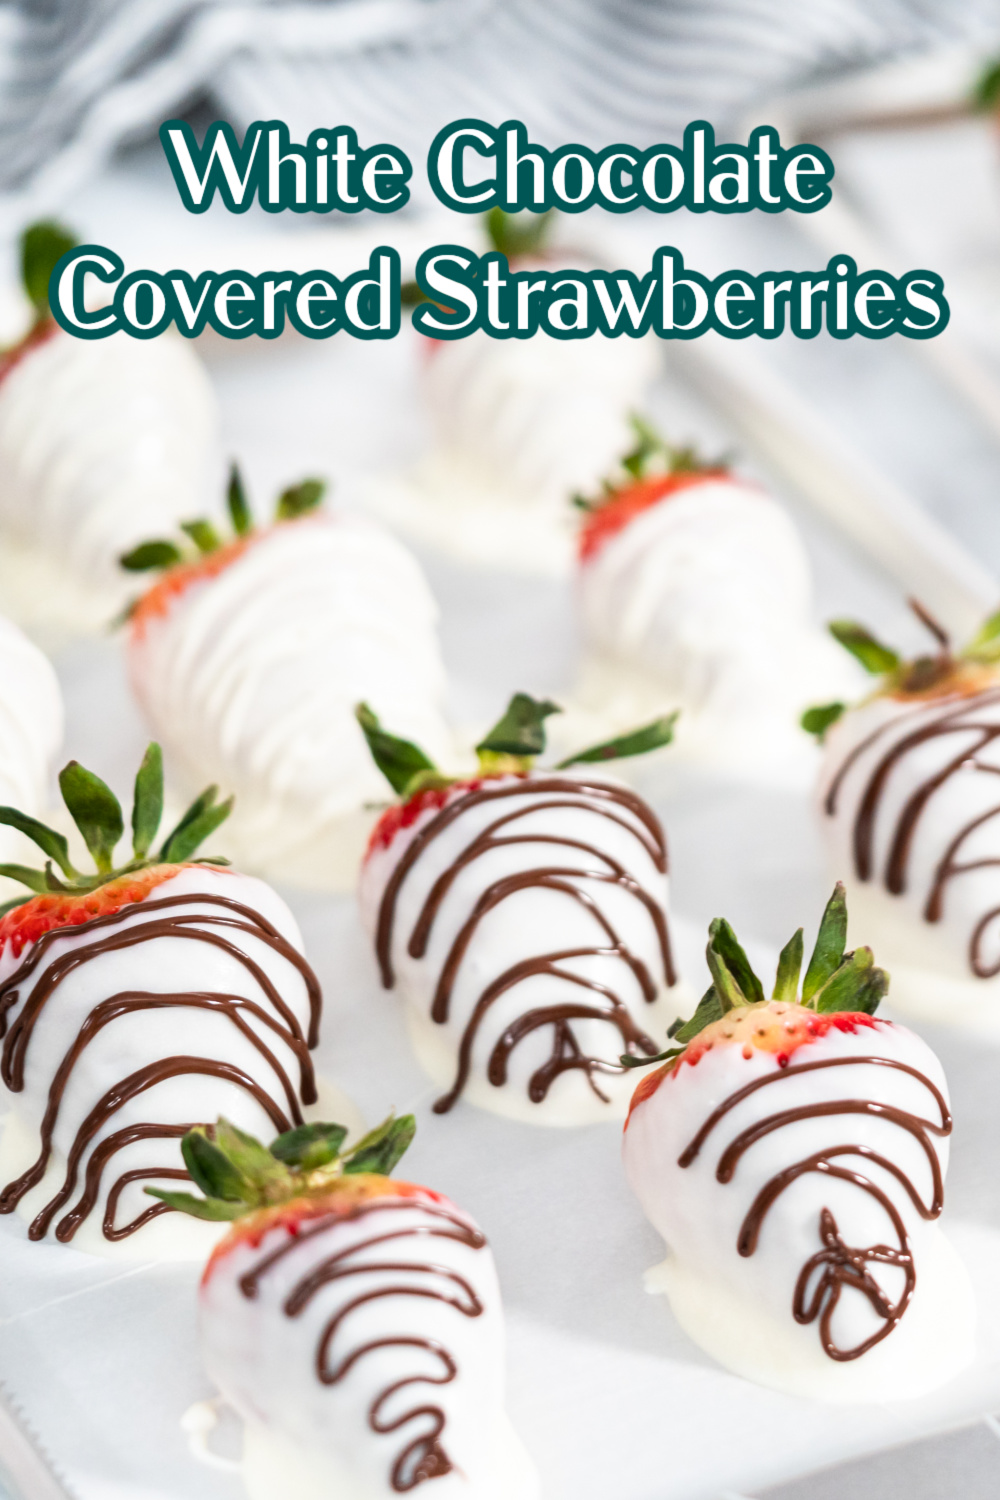 Learn to make your own homemade White Chocolate Covered Strawberries with this easy tutorial. Drizzled with white or milk chocolate, they make a delicious gift or bite-sized dessert any time of year! via @jugglingactmama